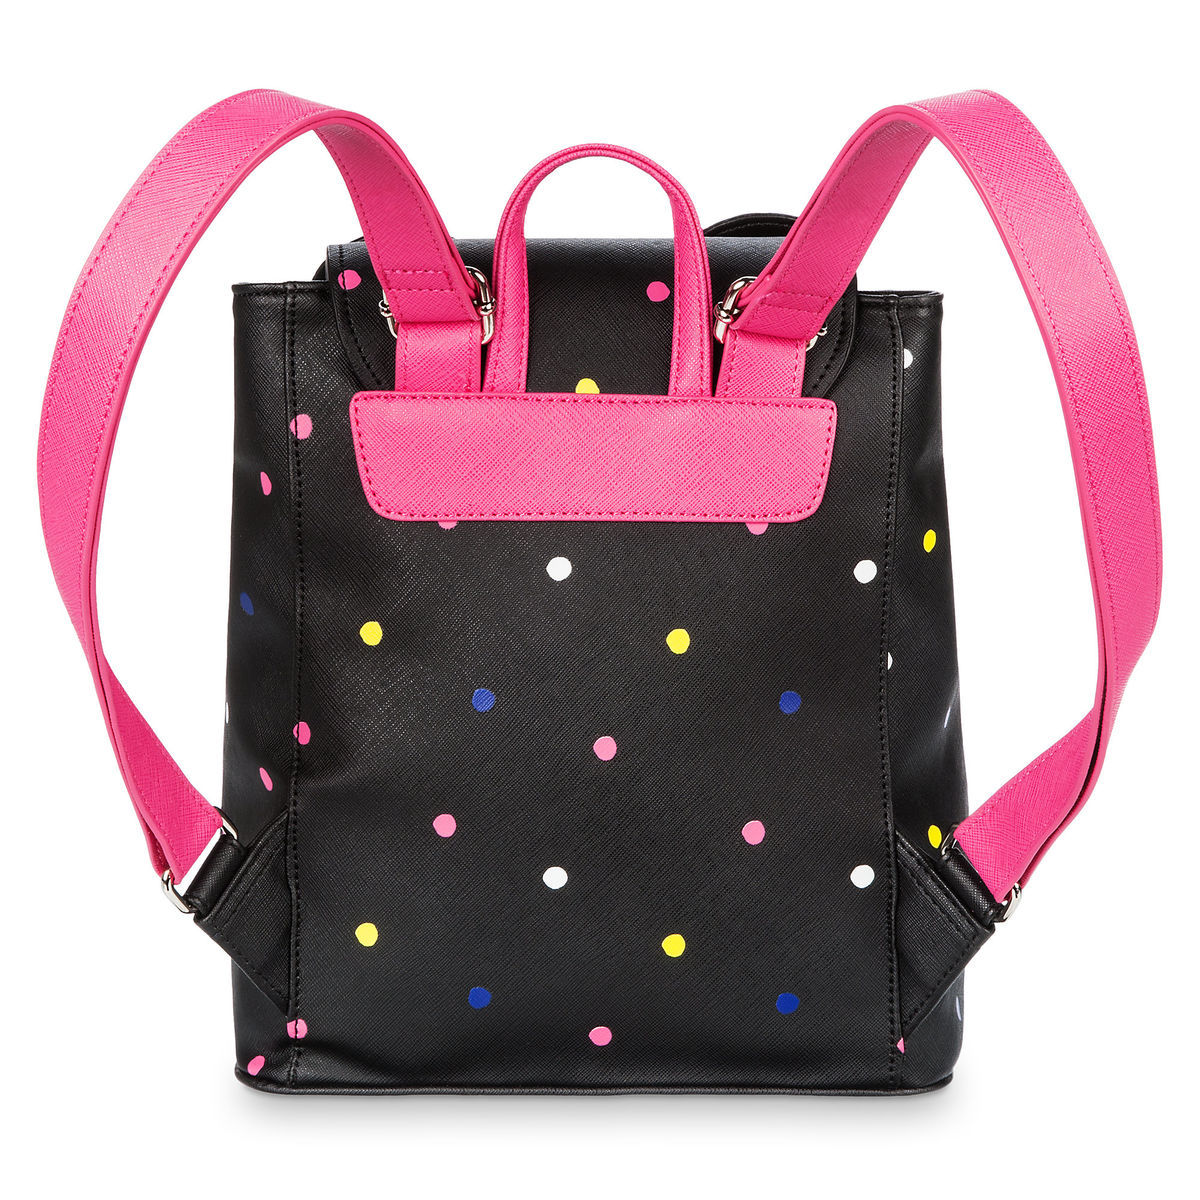 Disney Parks Minnie Mouse Mini Backpack by Loungefly Polka Dot New